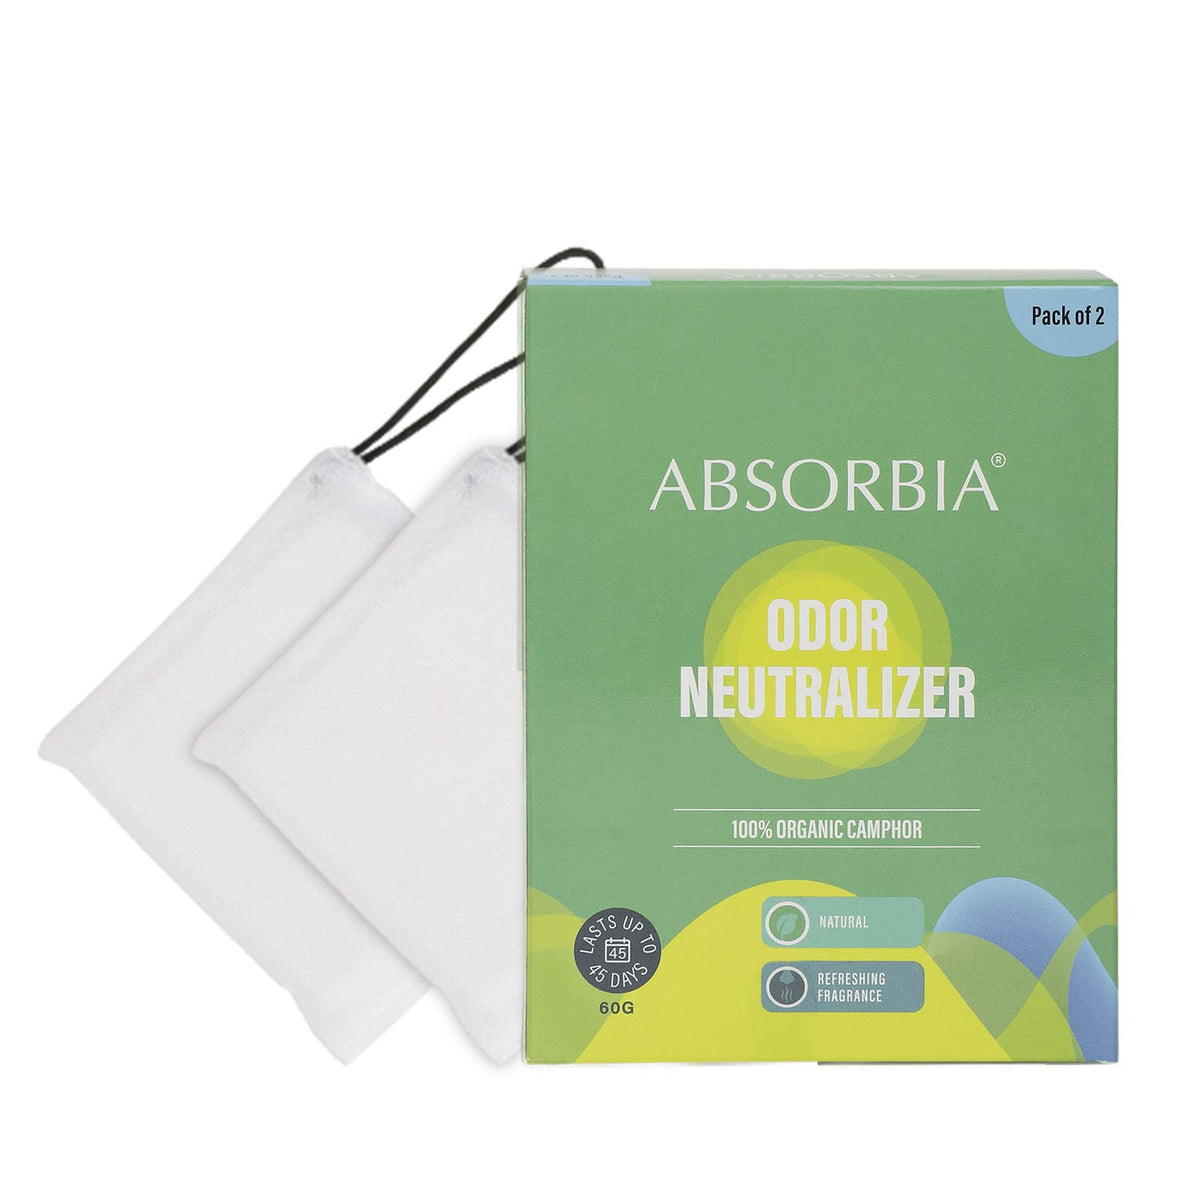 ABSORBIA Natural Camphor | 60grams each X 2 Pack | Room, Car and Air Freshener and it also act as an "Effective Insecticide"